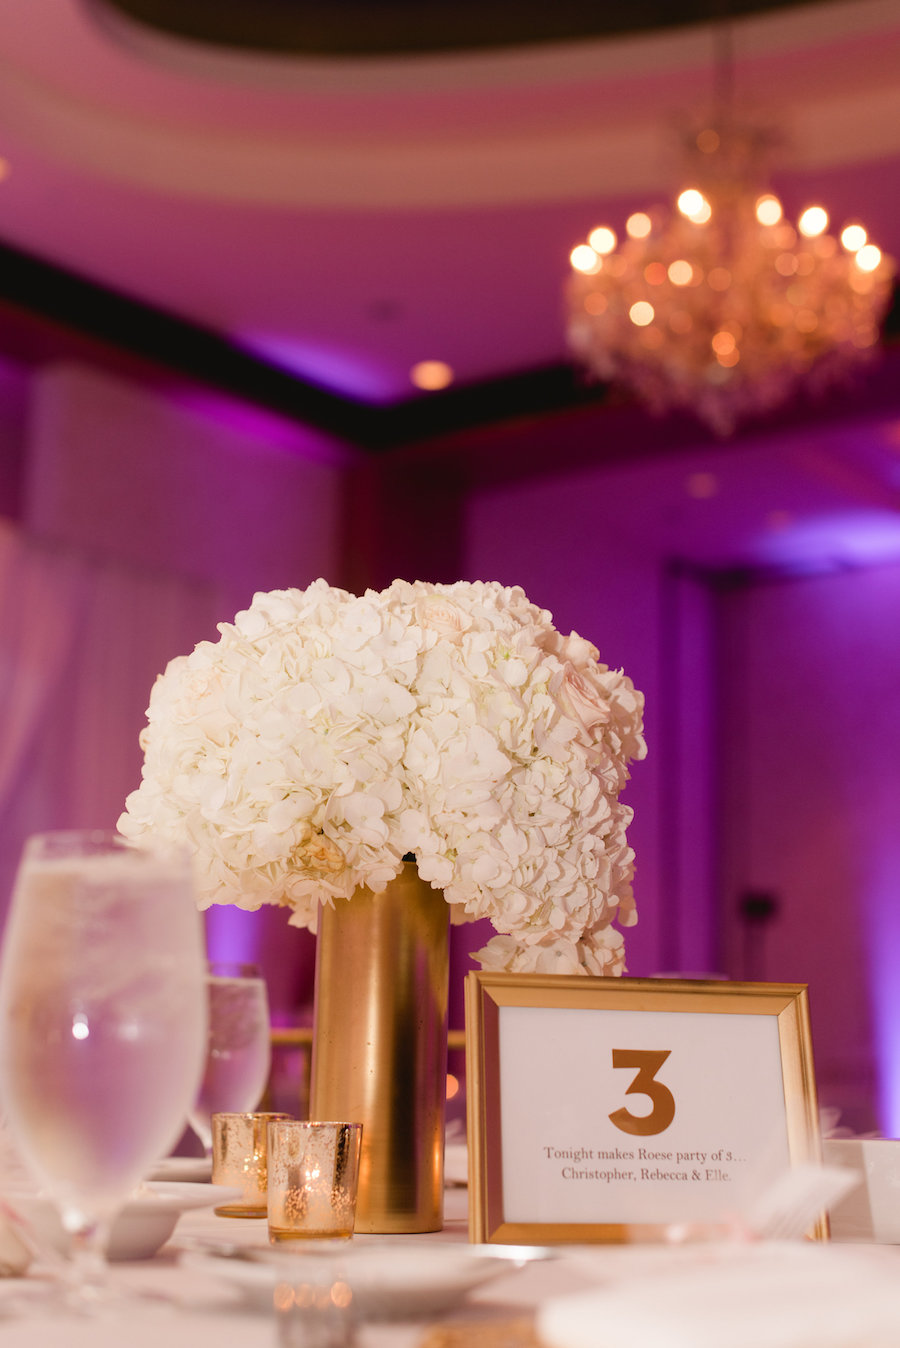 White Hydrangea Centerpieces with Gold Vase and Table Number | Elegant Ballroom Wedding Reception Decor Inspiration